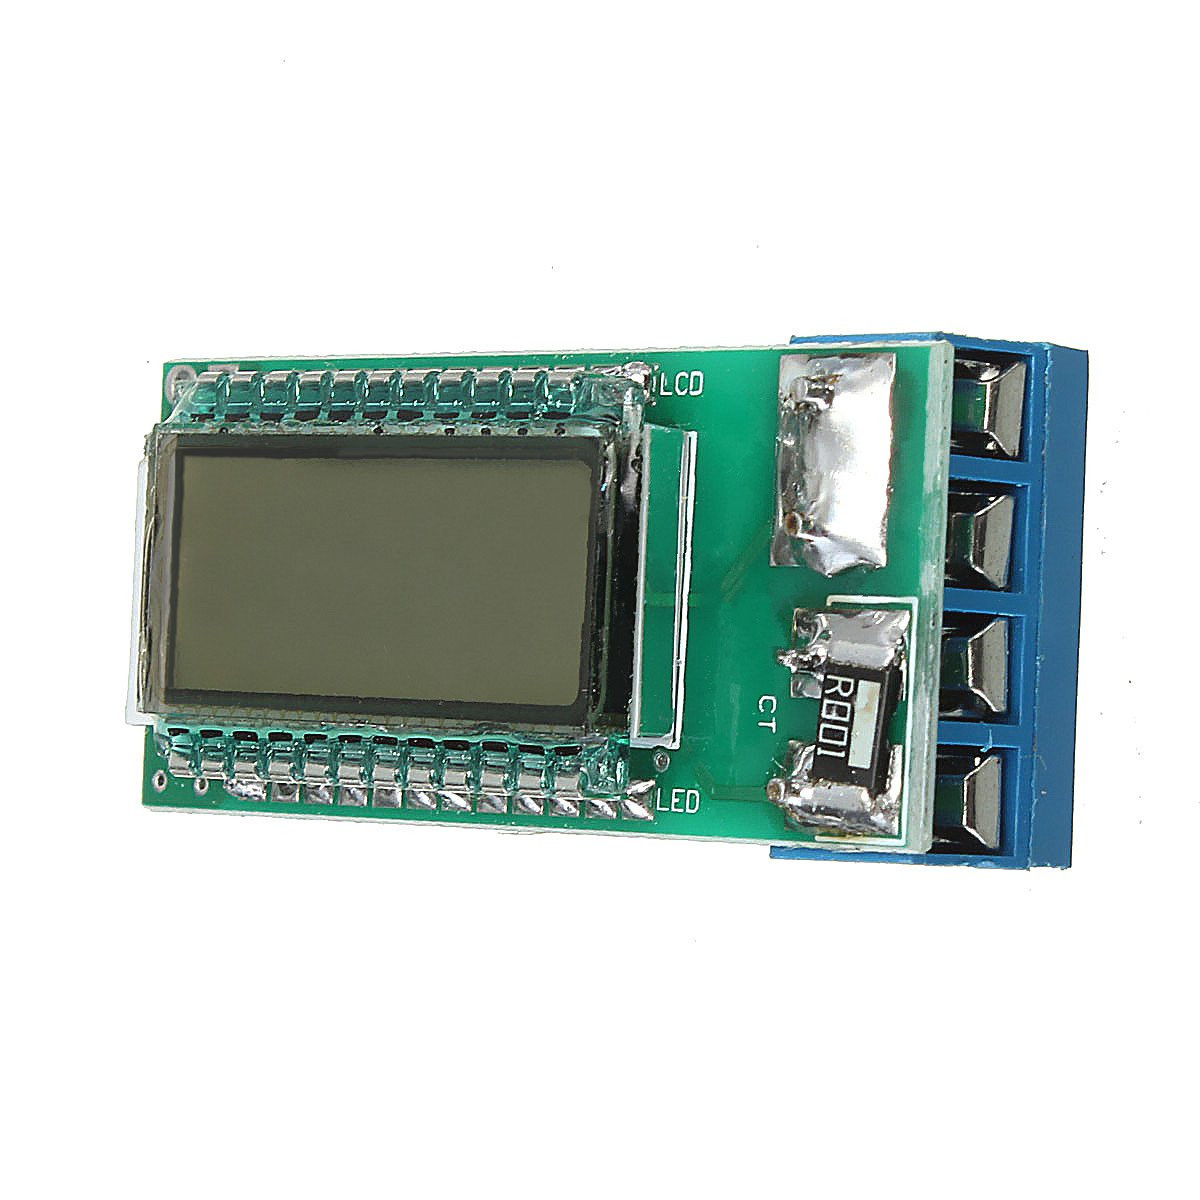 5pcs-18650-26650-Lithium-Li-ion-Battery-Capacity-Tester-LCD-Meter-Voltage-Current-Capacity-1328698